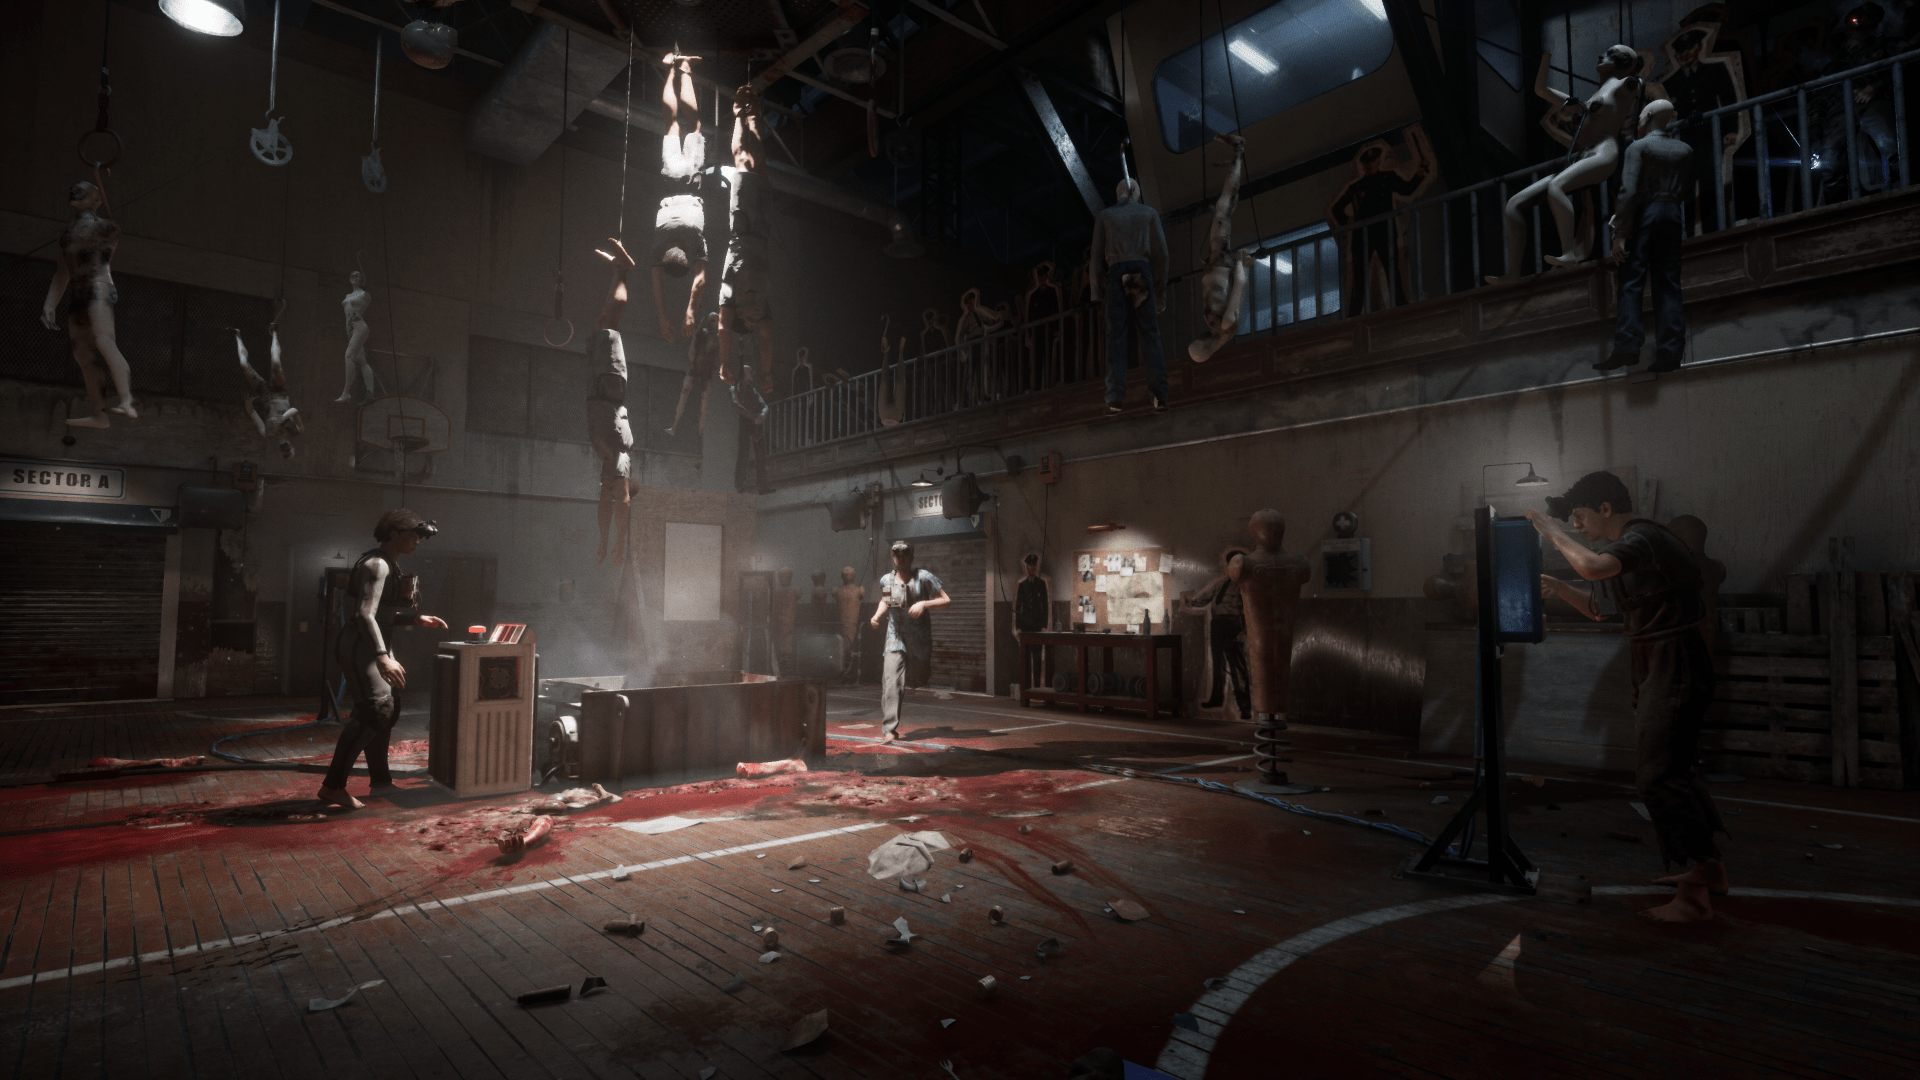 News - The Outlast Trials coming to consoles on March 4, 2024